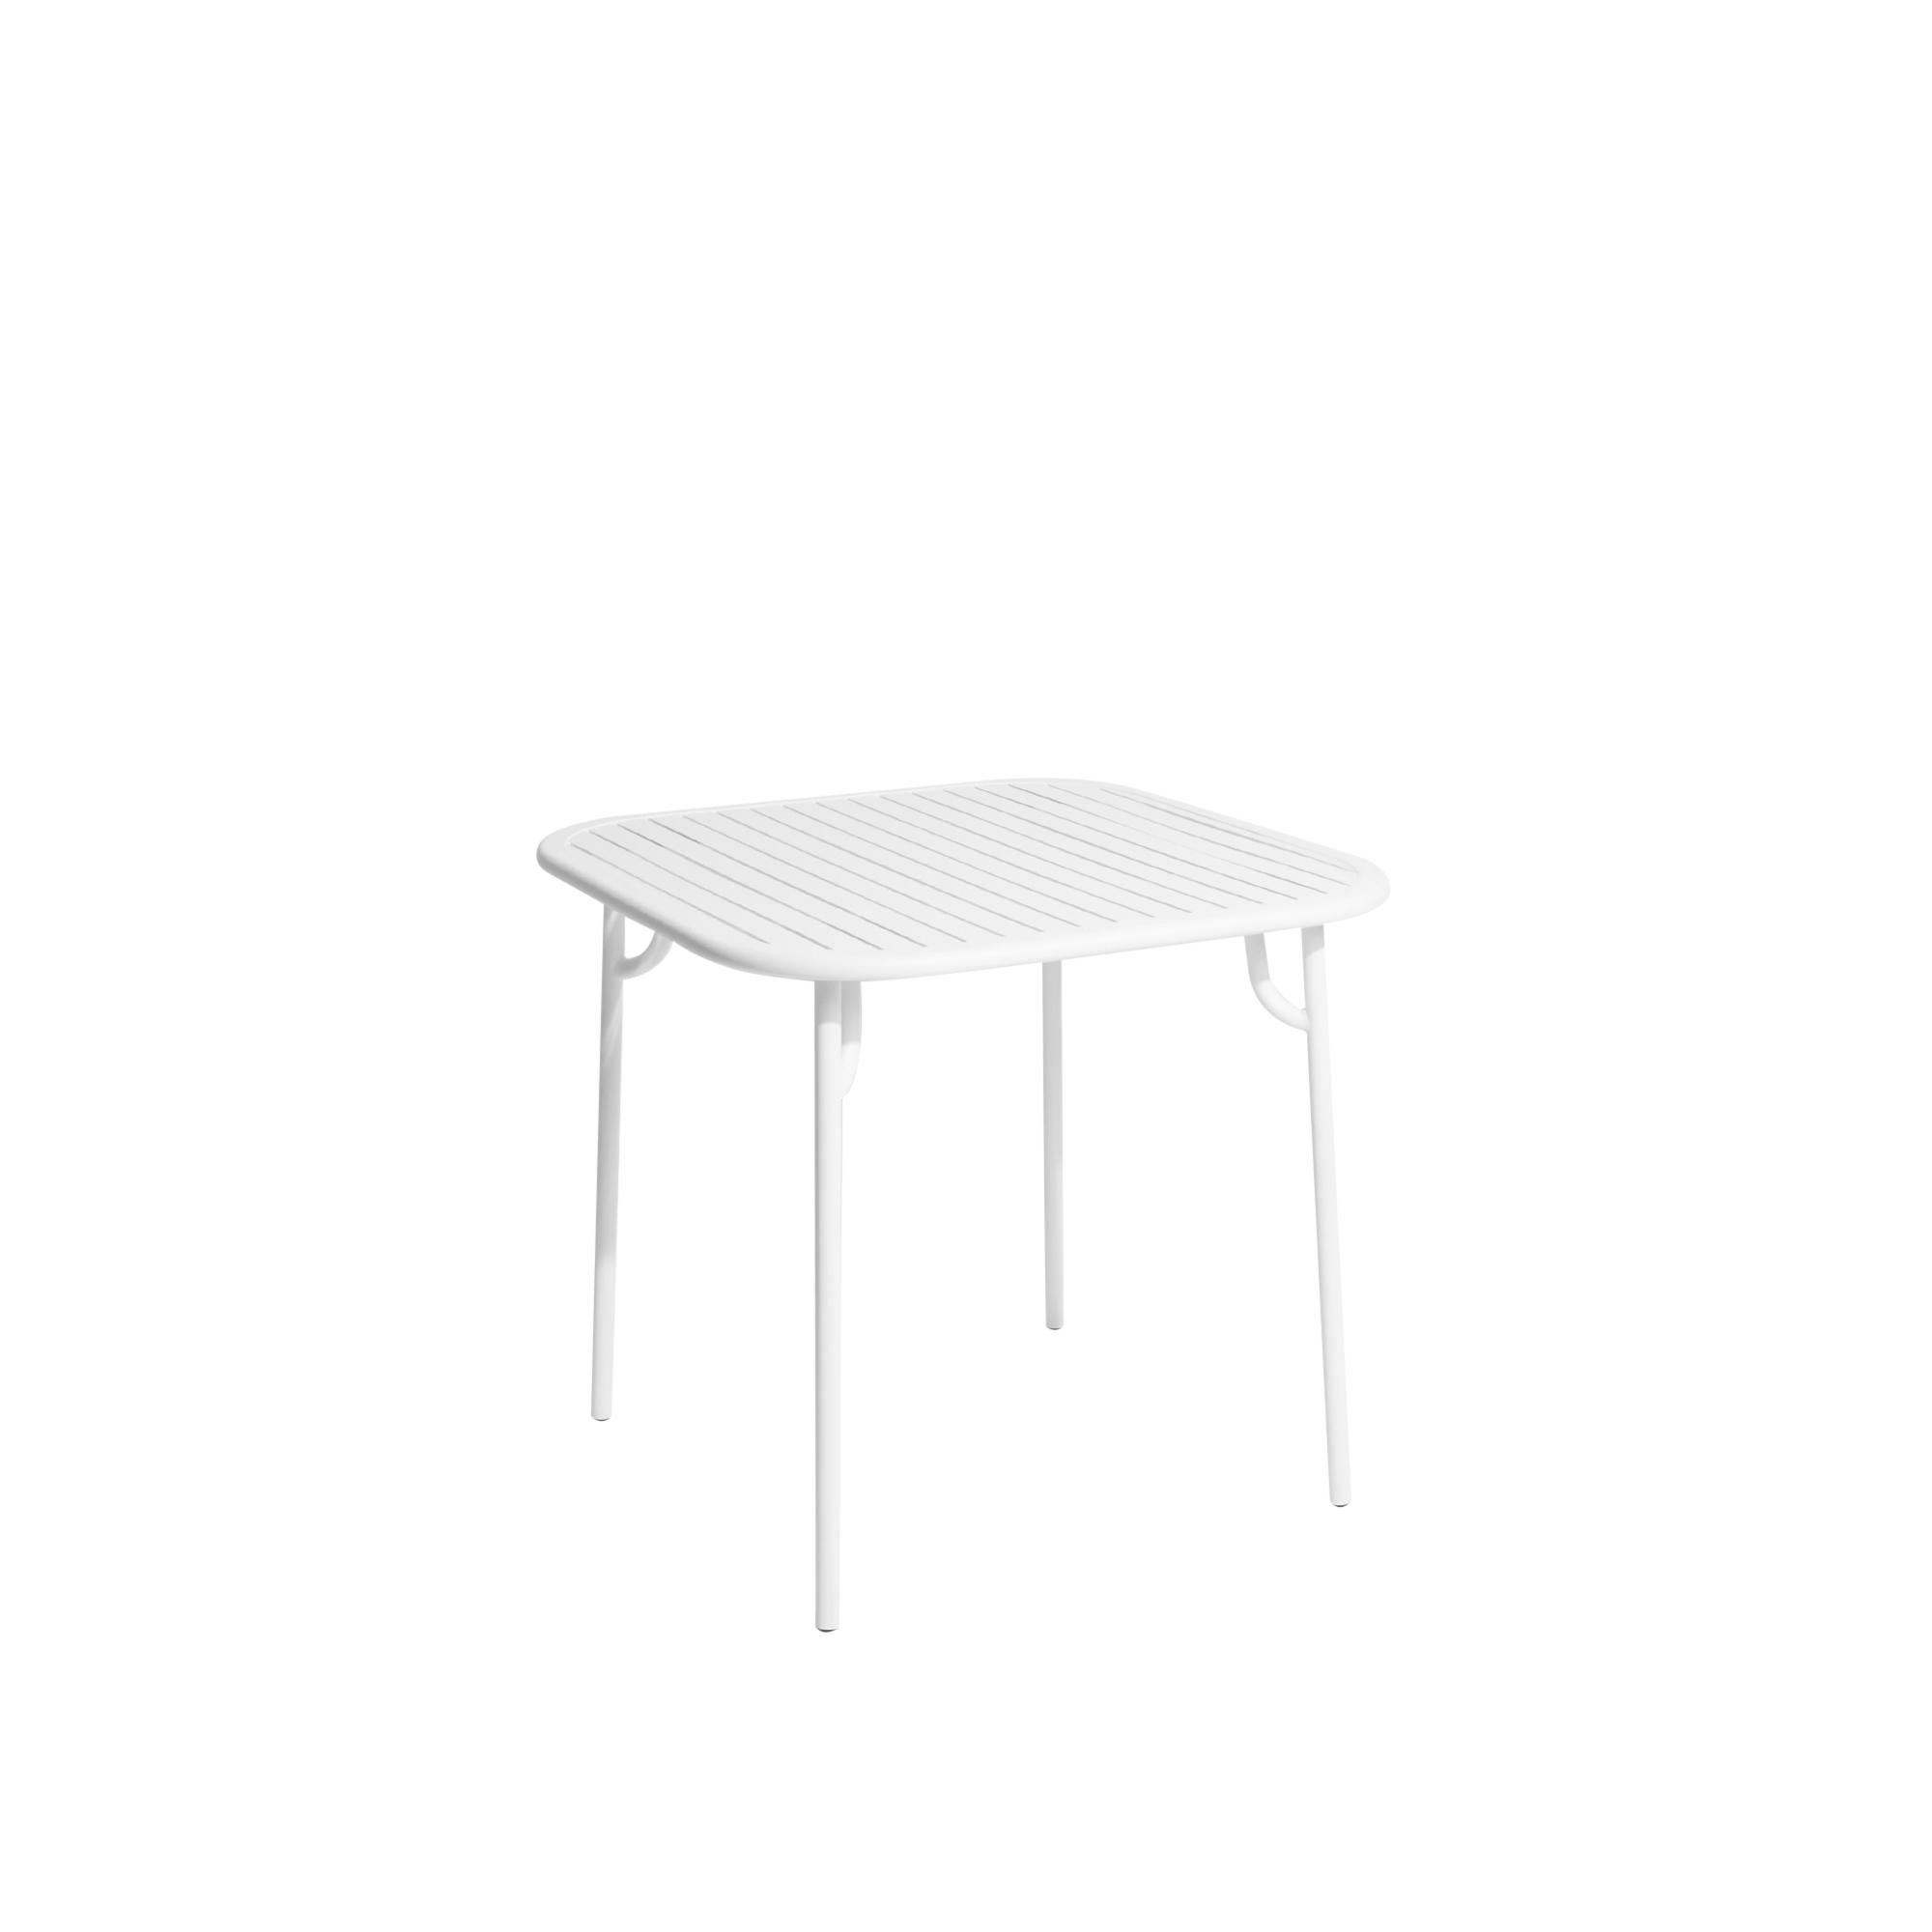 Petite Friture Week-End Square Dining Table in White Aluminium with Slats by Studio BrichetZiegler, 2017

The week-end collection is a full range of outdoor furniture, in aluminium grained epoxy paint, matt finish, that includes 18 functions and 8